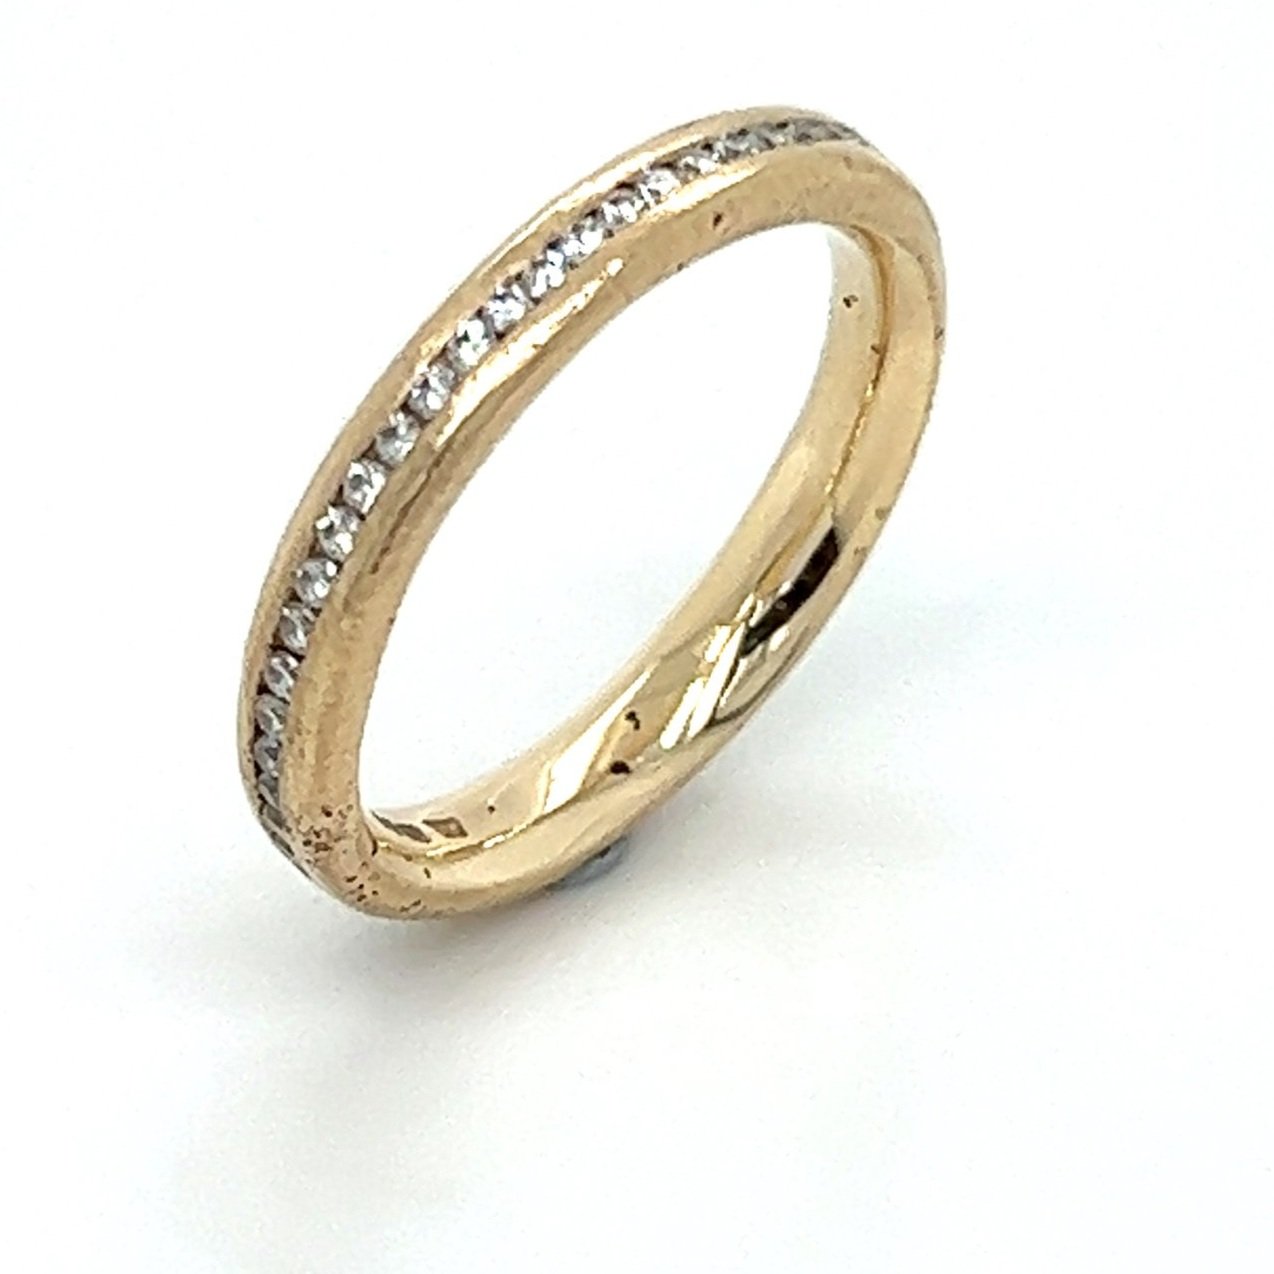 Justin Duance Eternity Ring